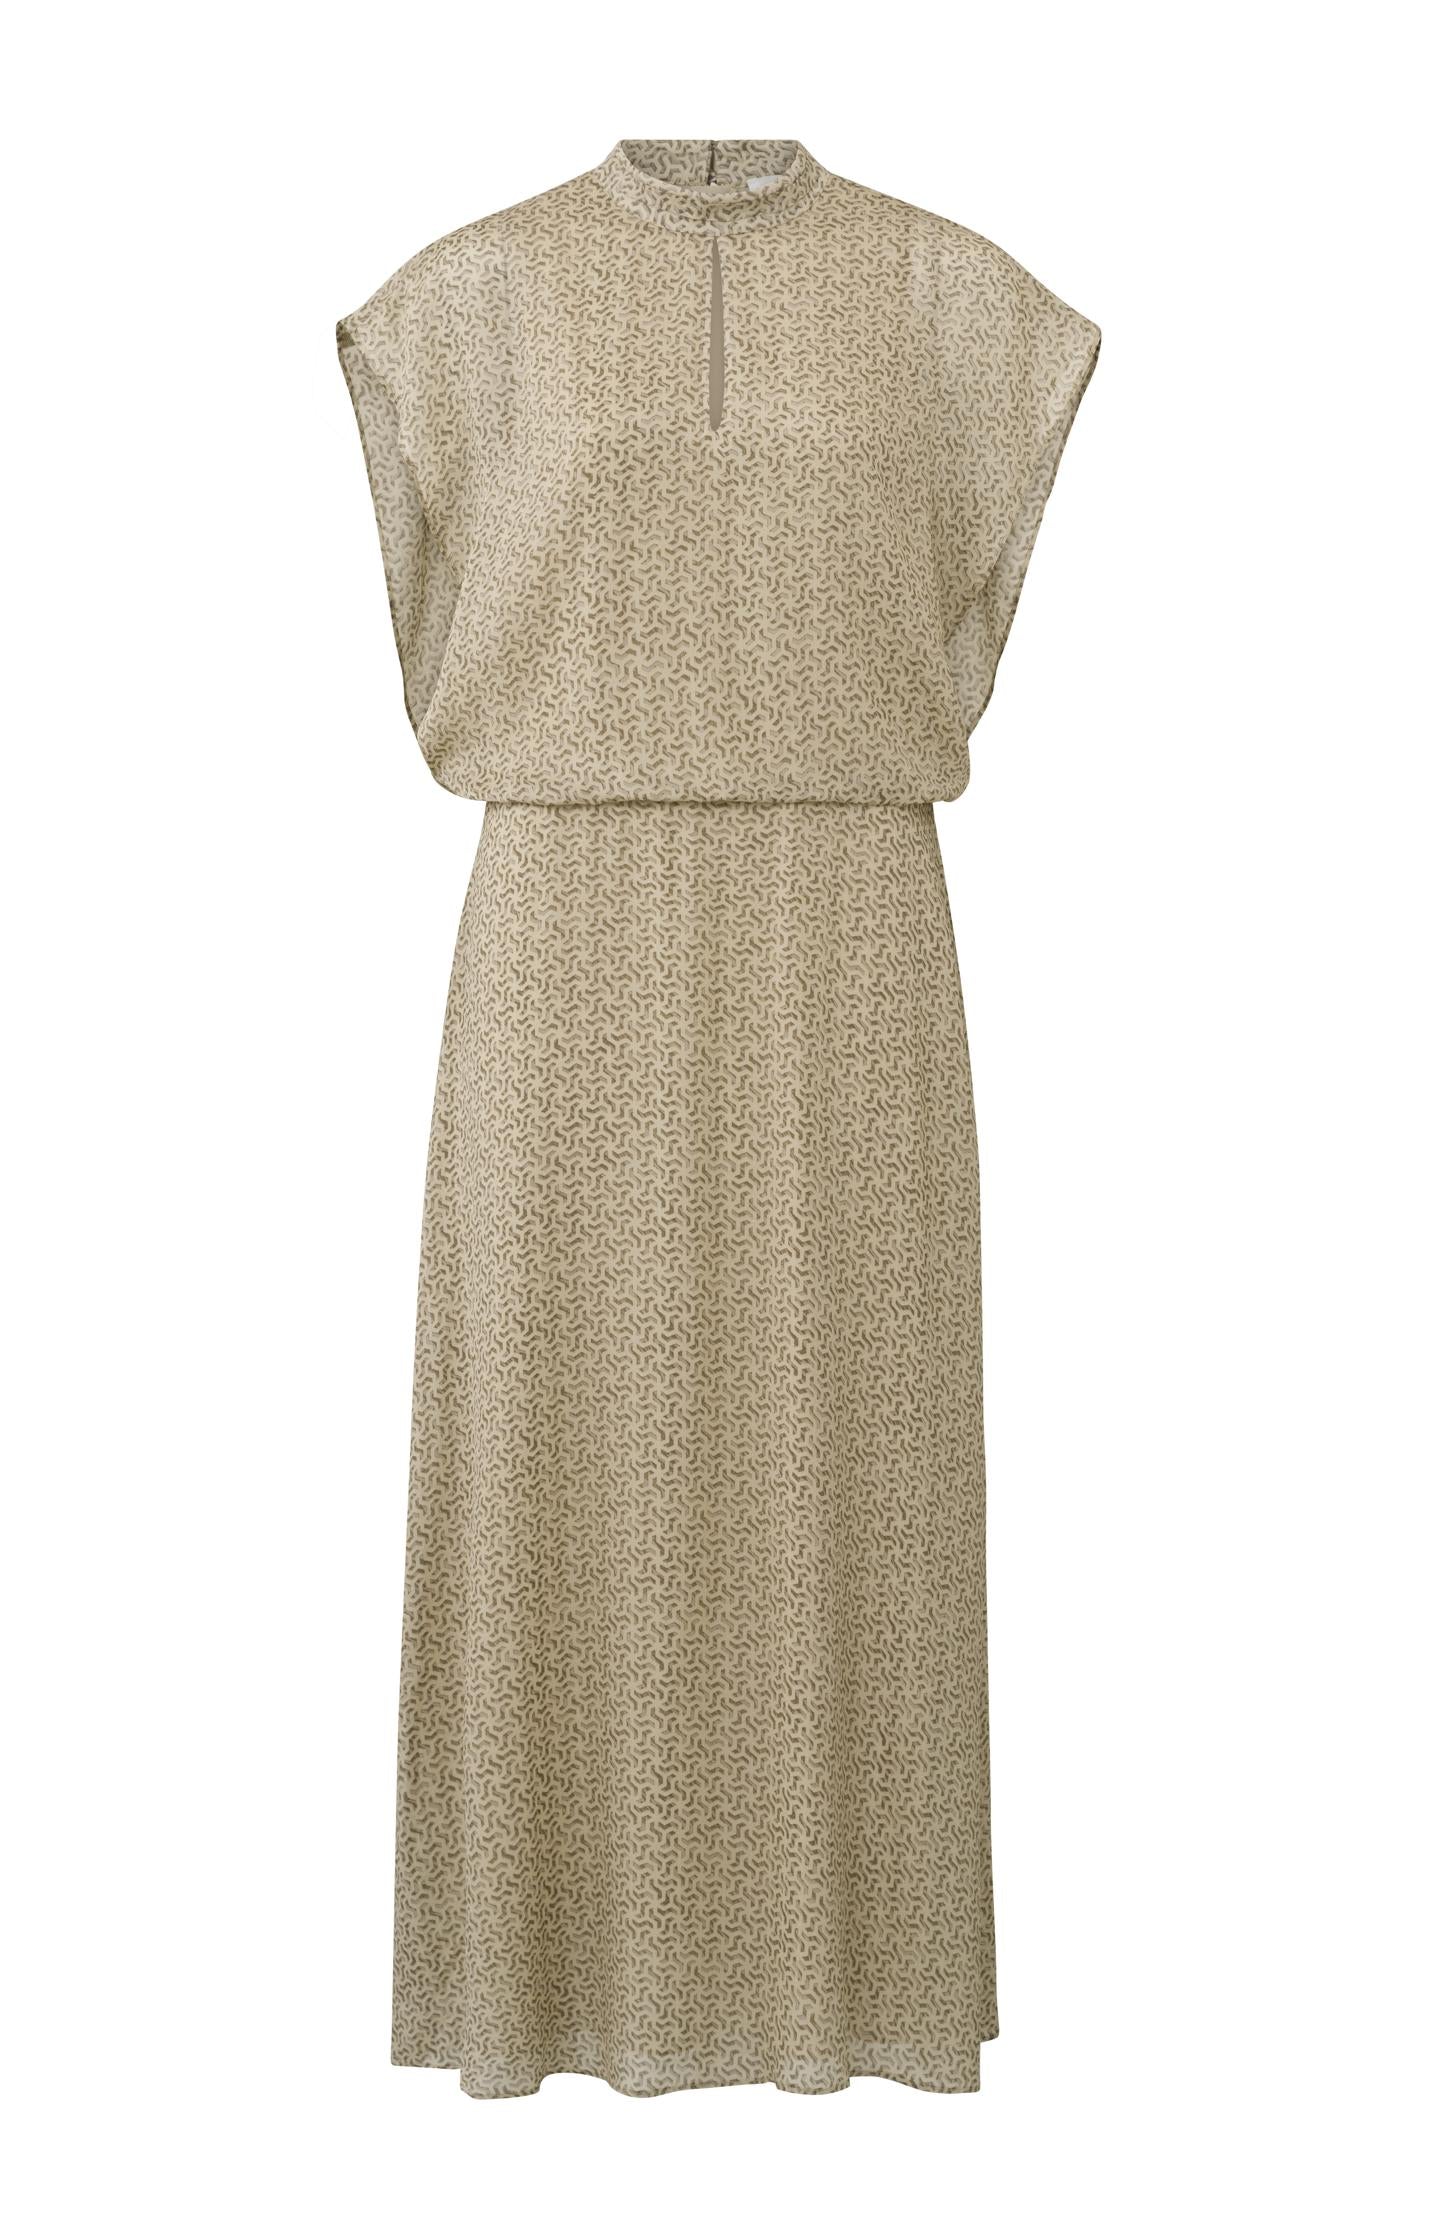 Sleeveless dress with high neck, button and geometric print - Type: product